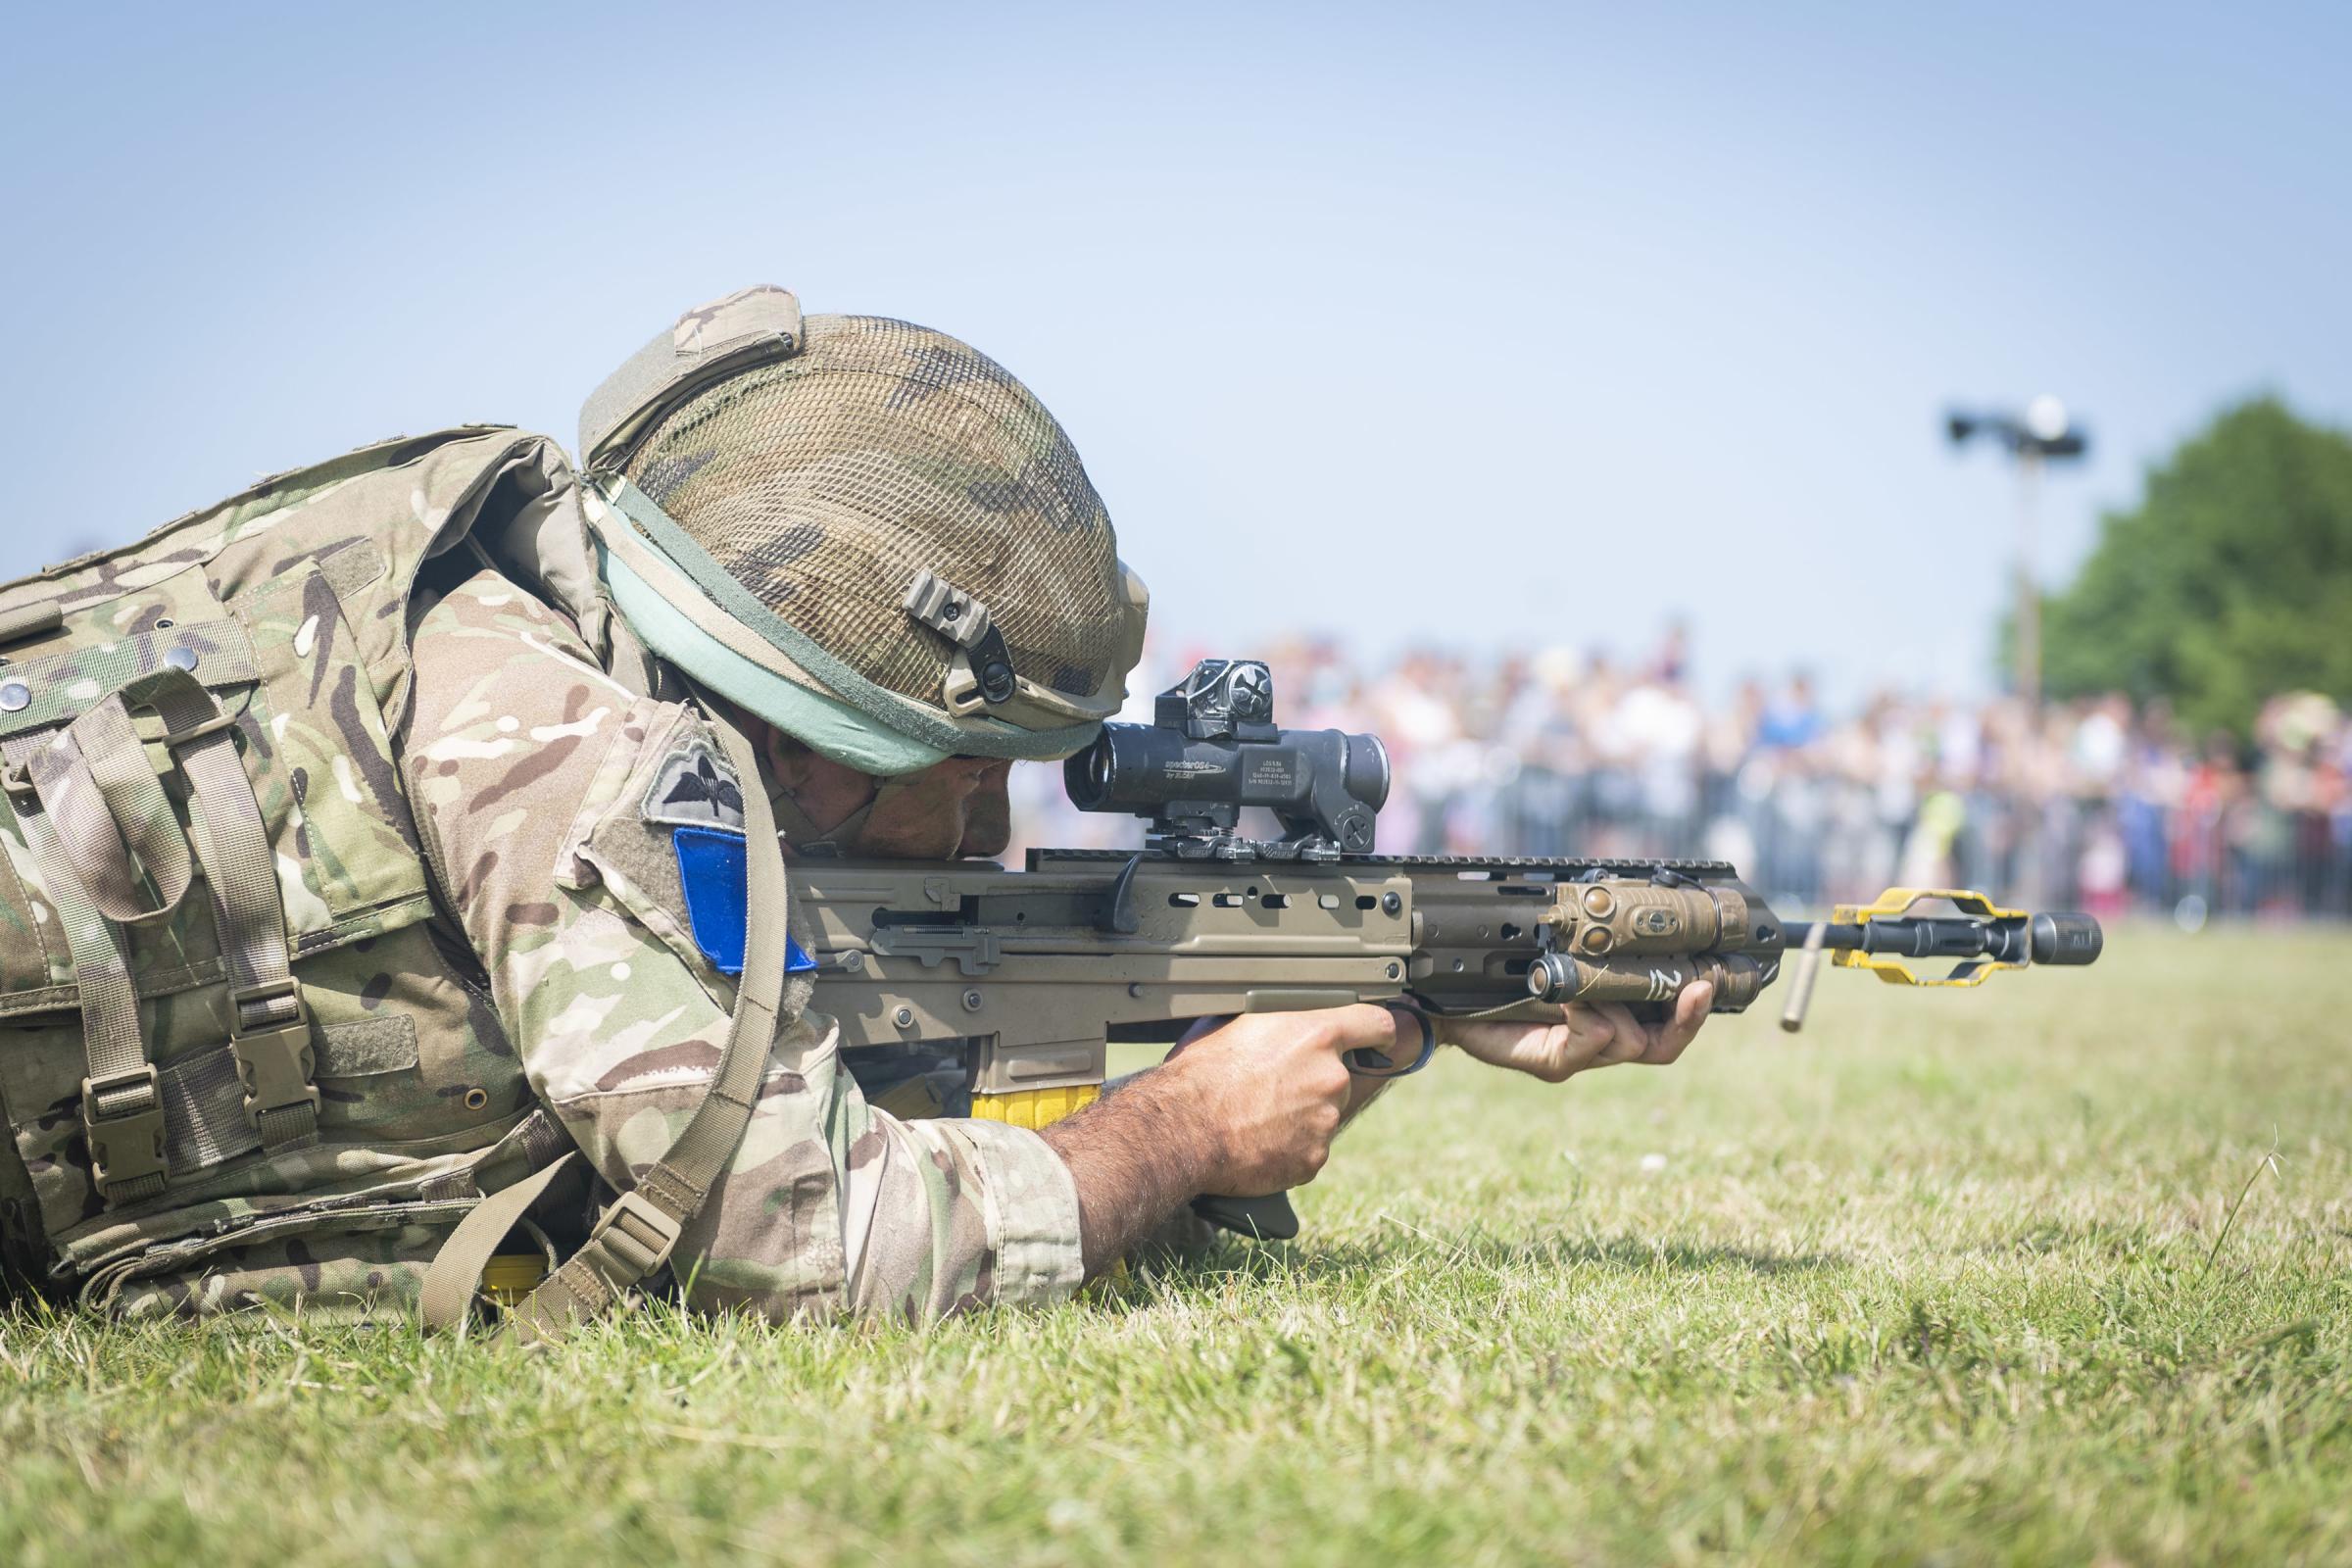 Aiming - a soldier taking part in a combat demonstration in the last event